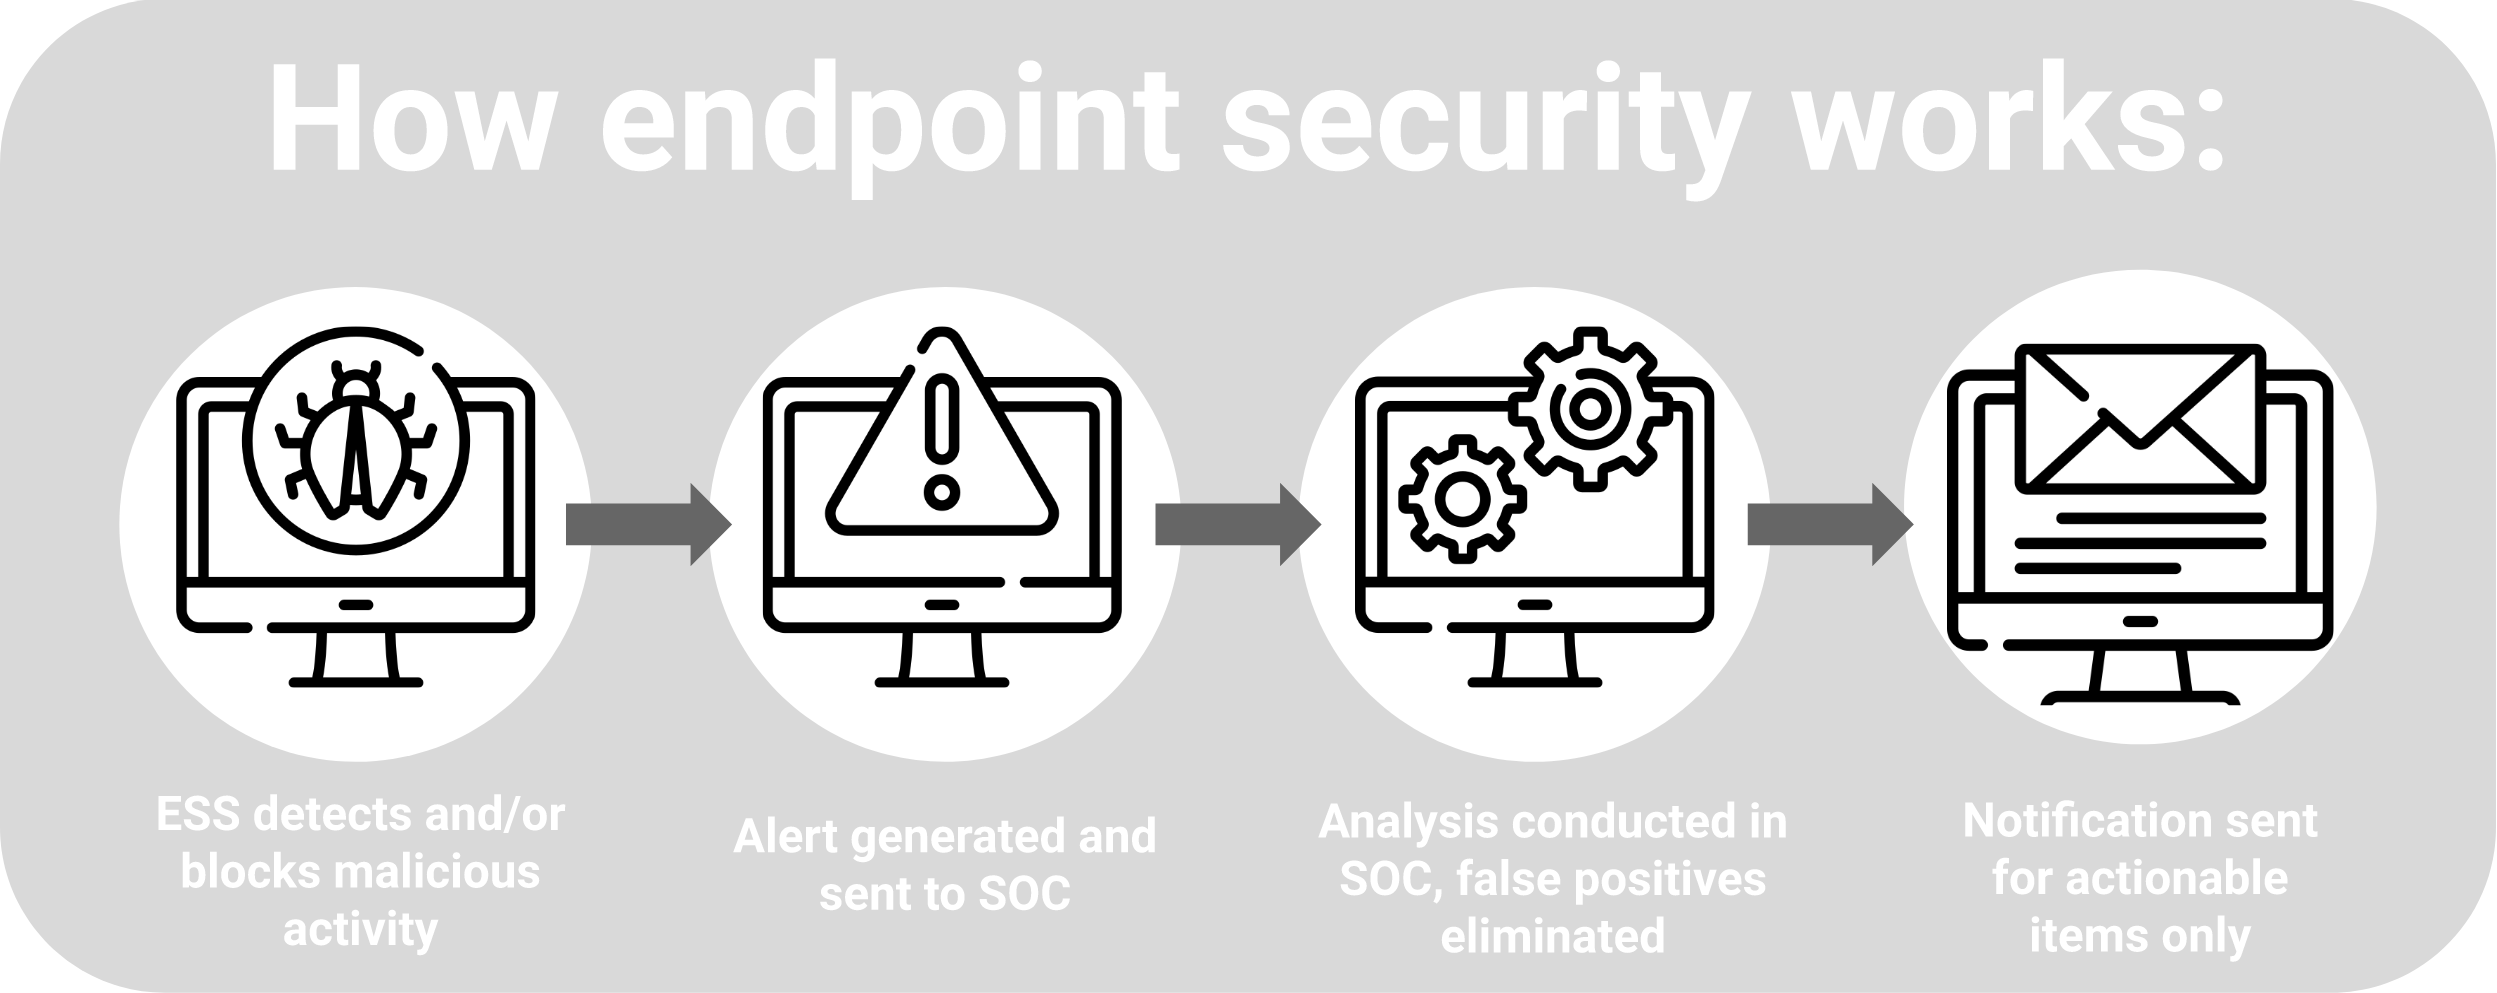 managed endpoint security 